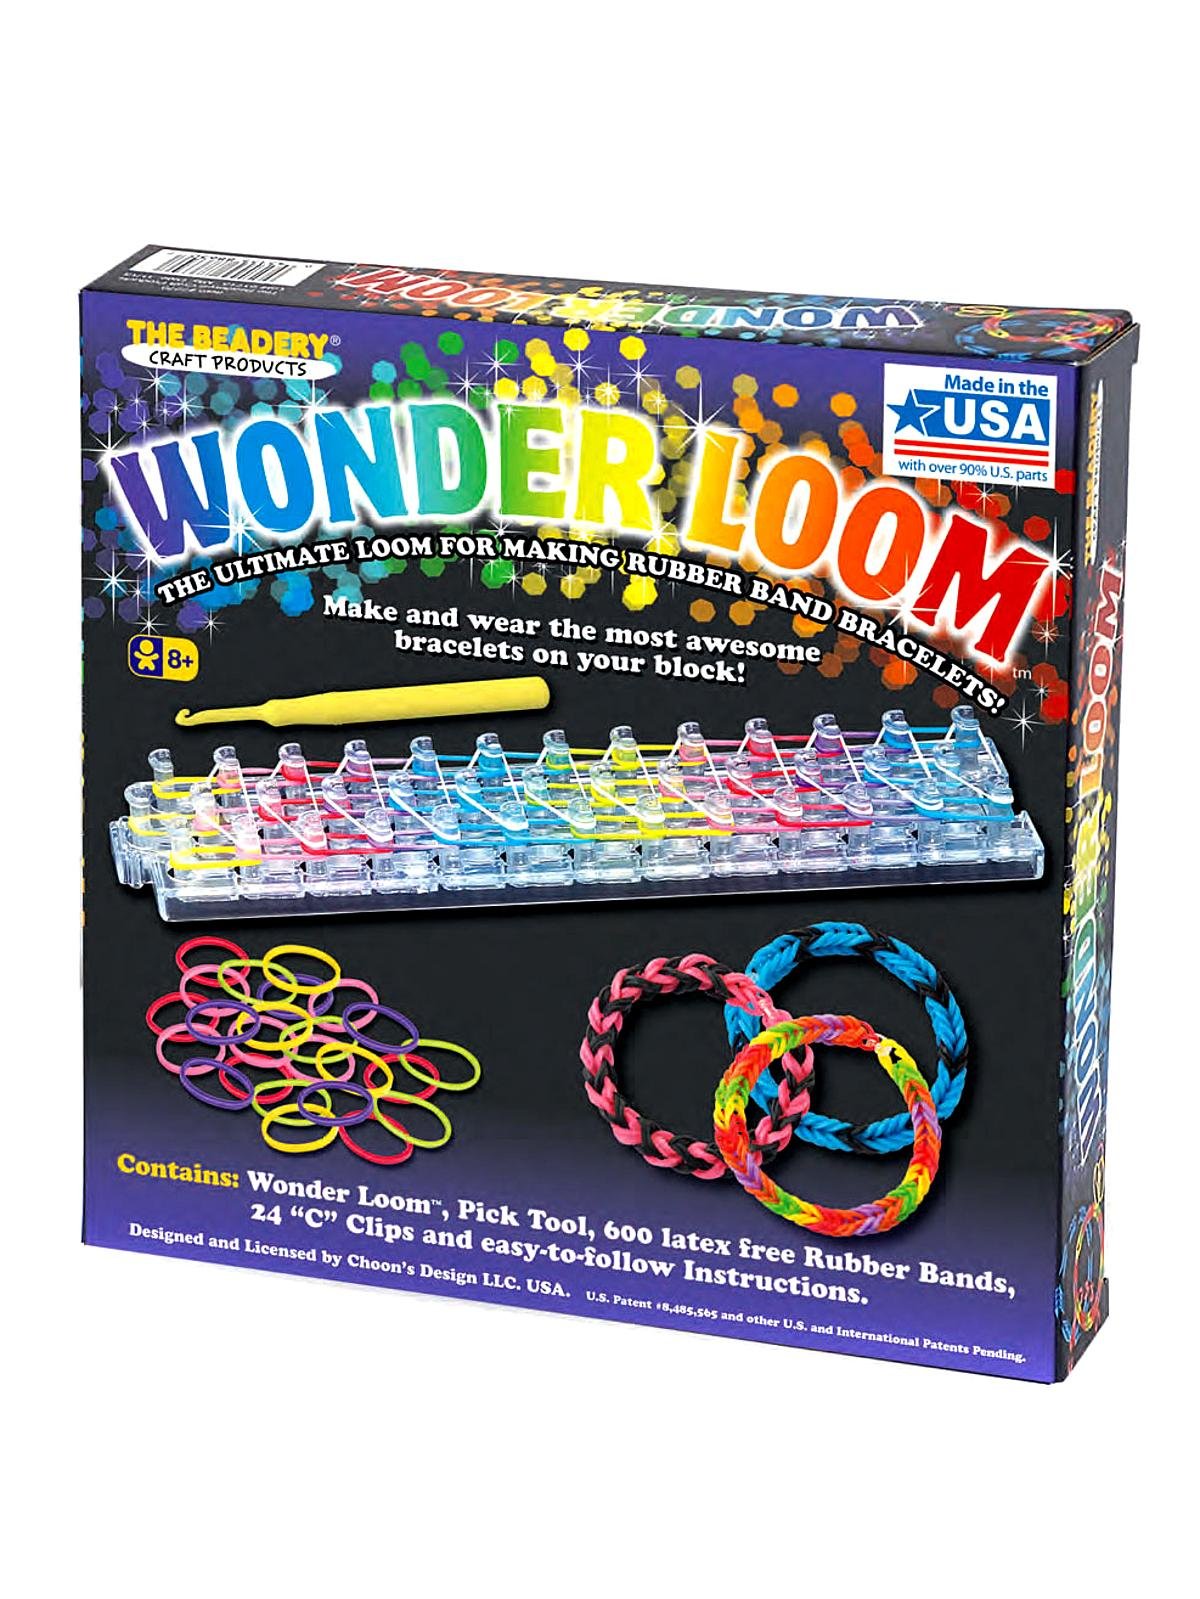 Toys101 - L😜🧐K, Its back!! 📿Cra-Z-Loom is the Ultimate Rubber Band  Bracelet Maker where Girls👧 and Boys 👦can create hundreds of personalized  bracelets to wear and share. Get the Hottest🔥 and Best